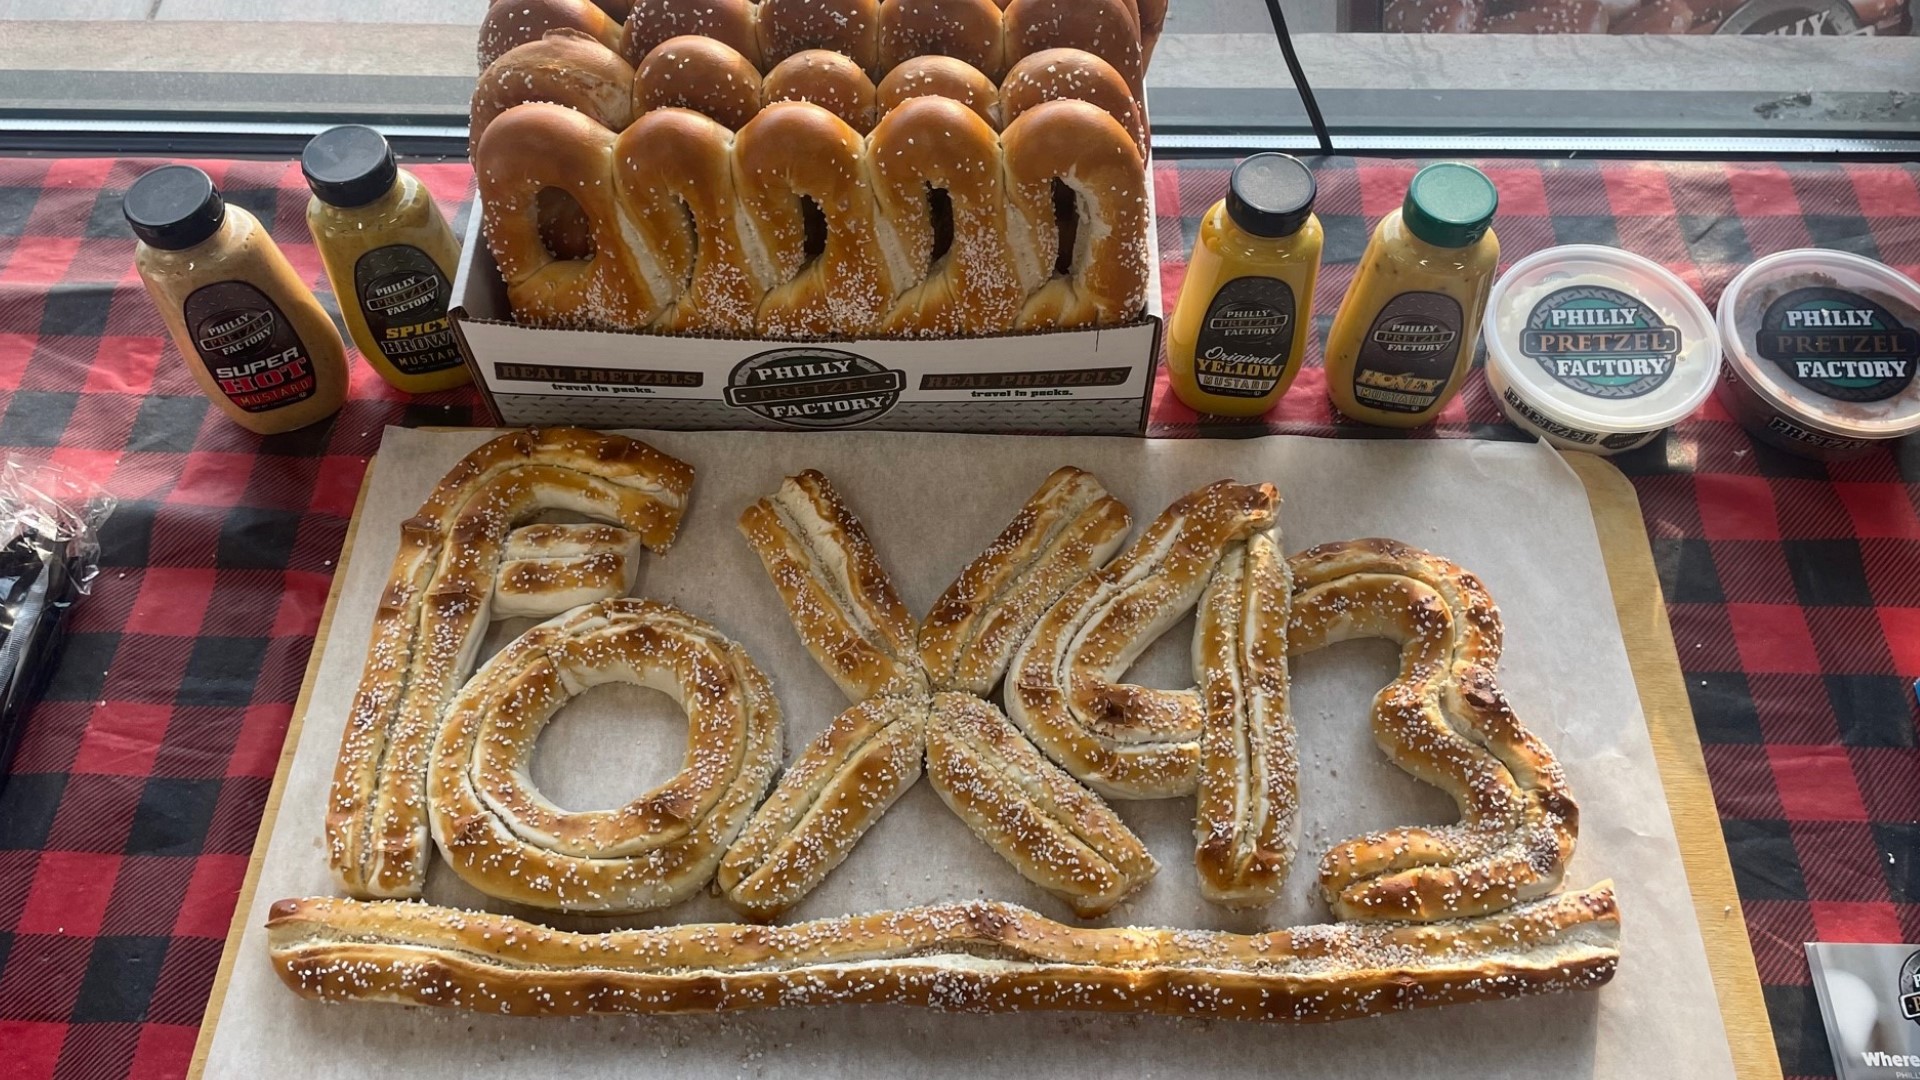 Say that 3 times fast. Guests can get a free pretzel with no purchase necessary on April 26.